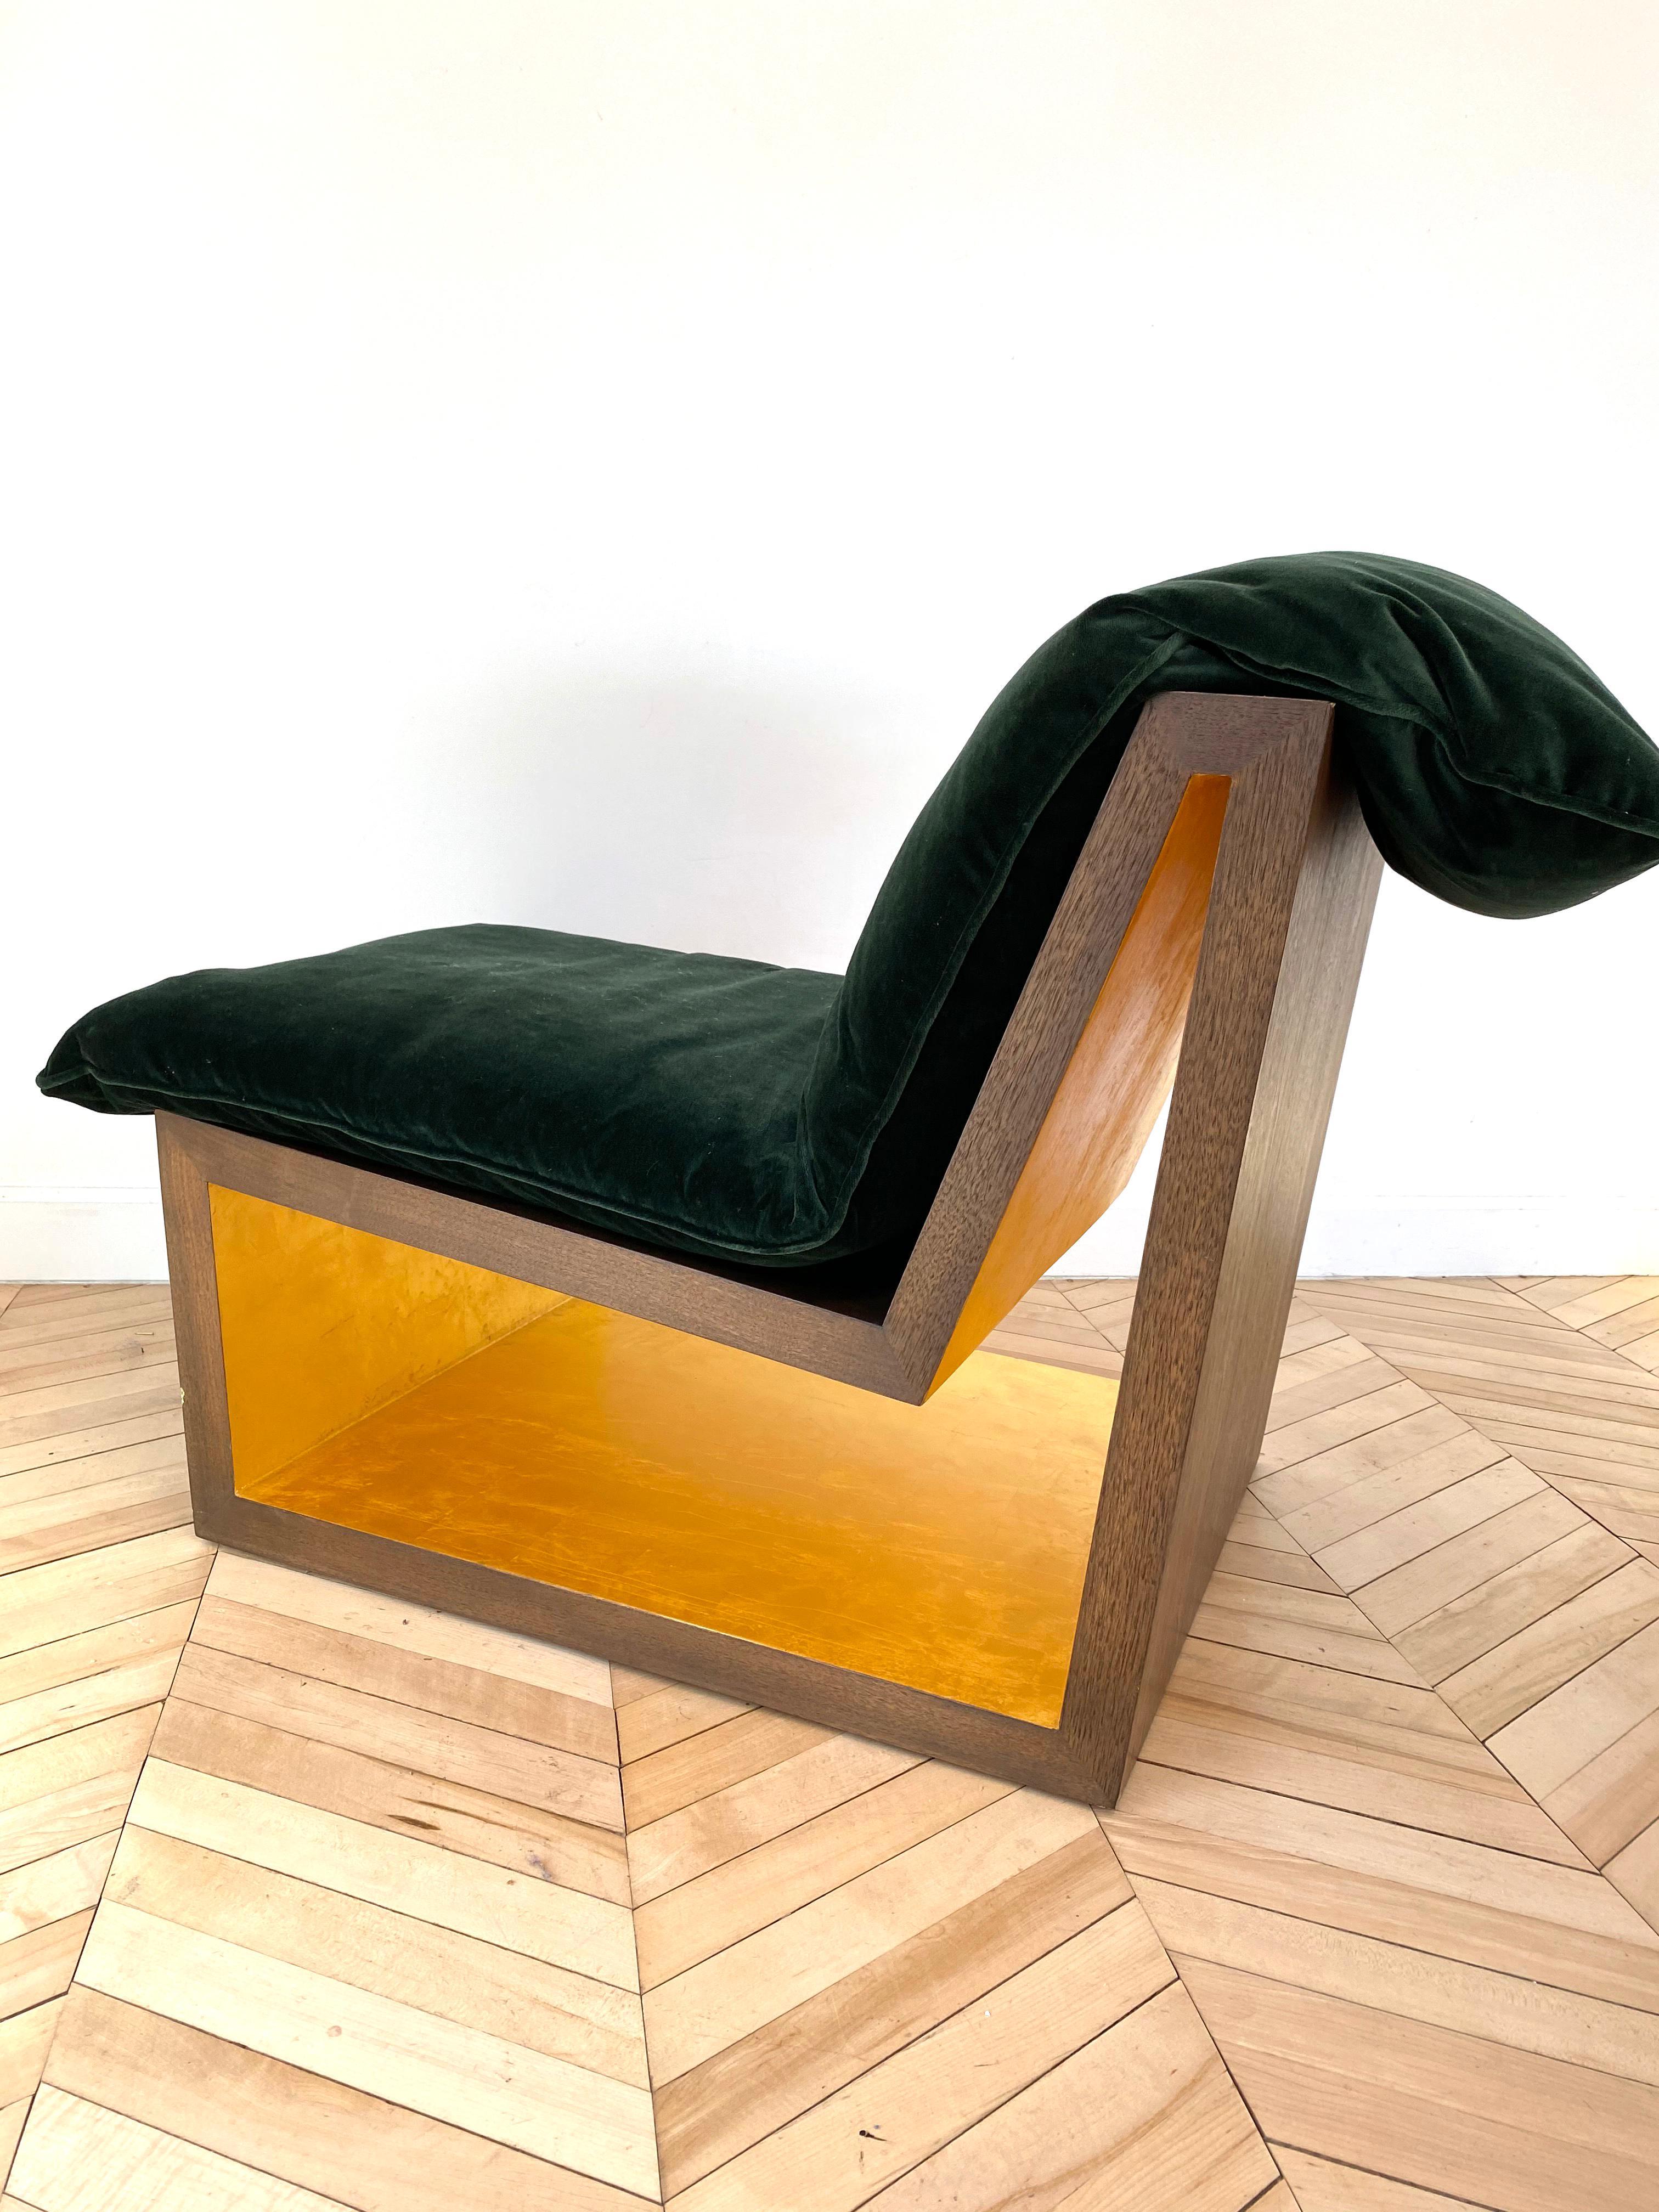 Gilt Tucker Lounge Chair, Contemporary, Walnut and Gold Leaf, by Dean and Dahl